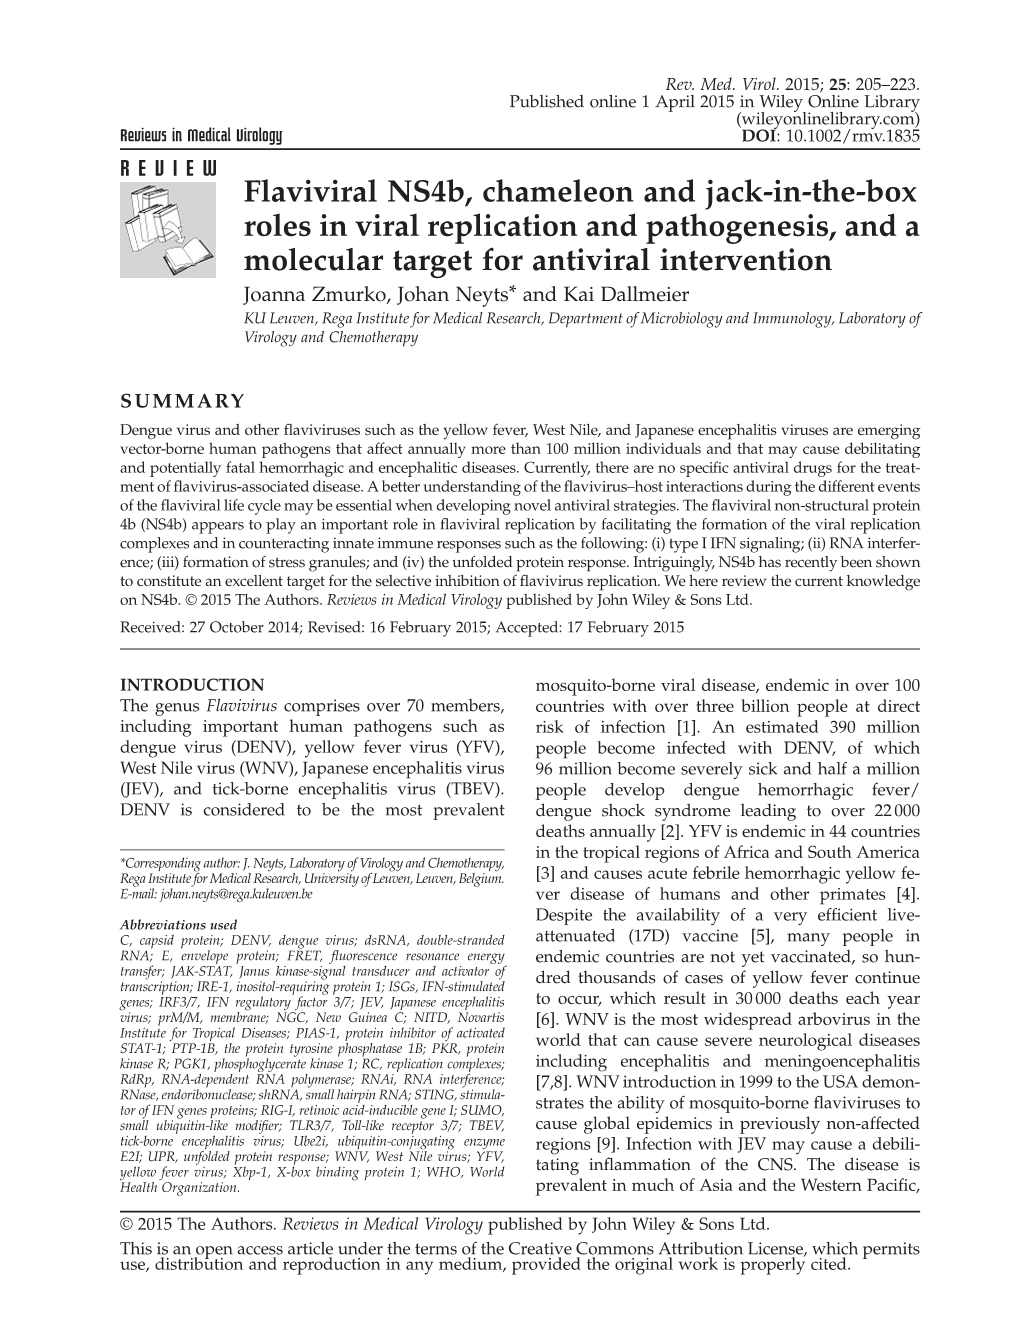 Flaviviral Ns4b, Chameleon and Jack-In-The-Box Roles in Viral